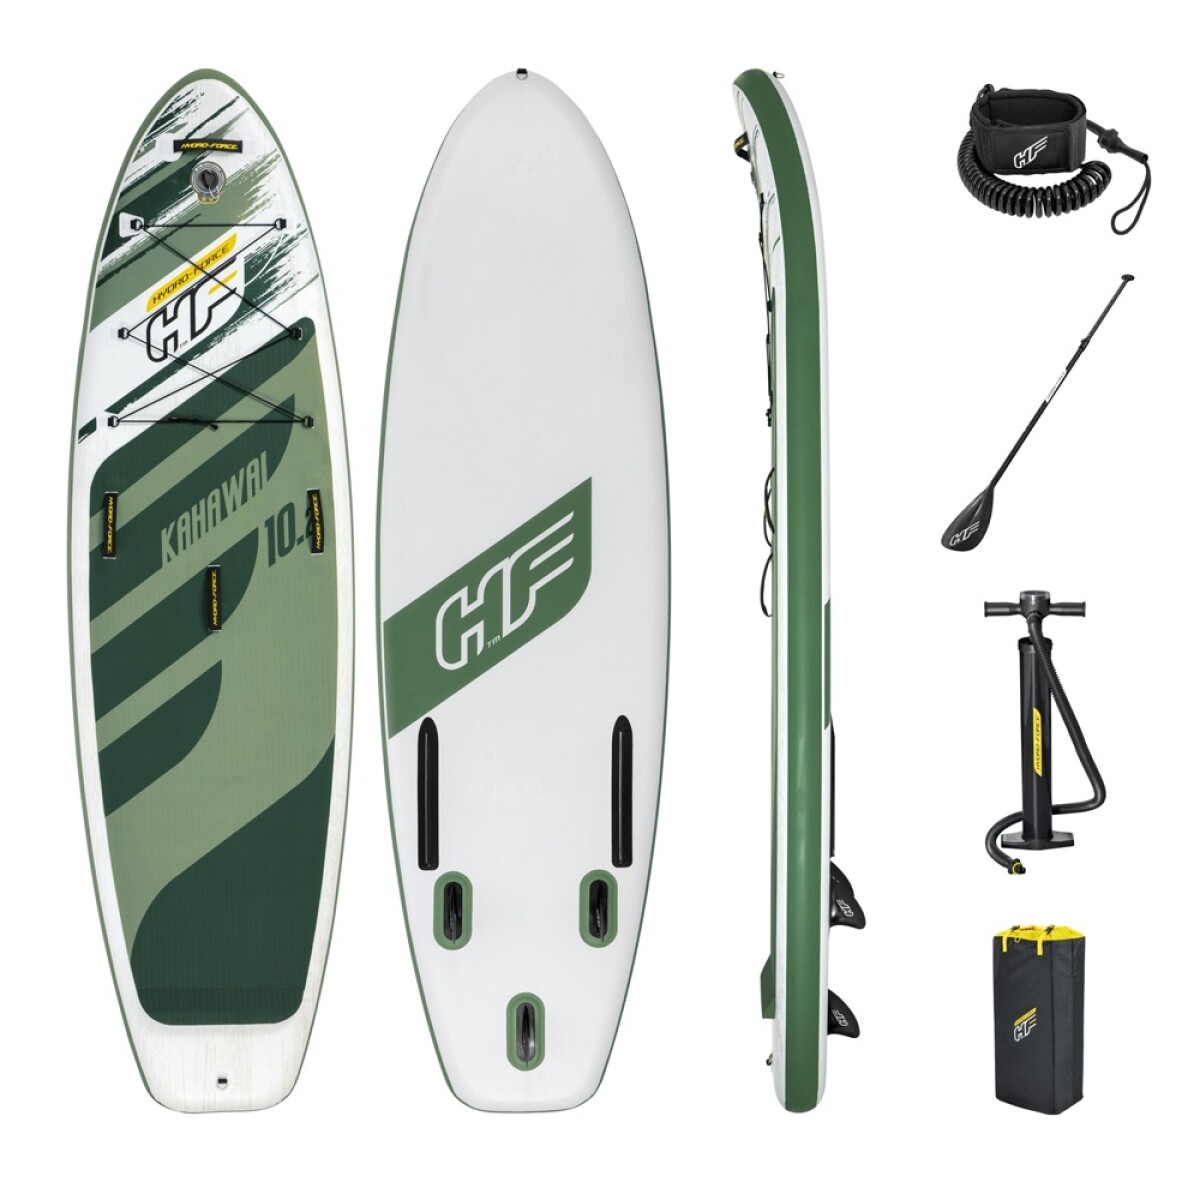 Tabla Stand Up Paddle Bestway Surf + Remo + Inflador + Bolso - Verde 